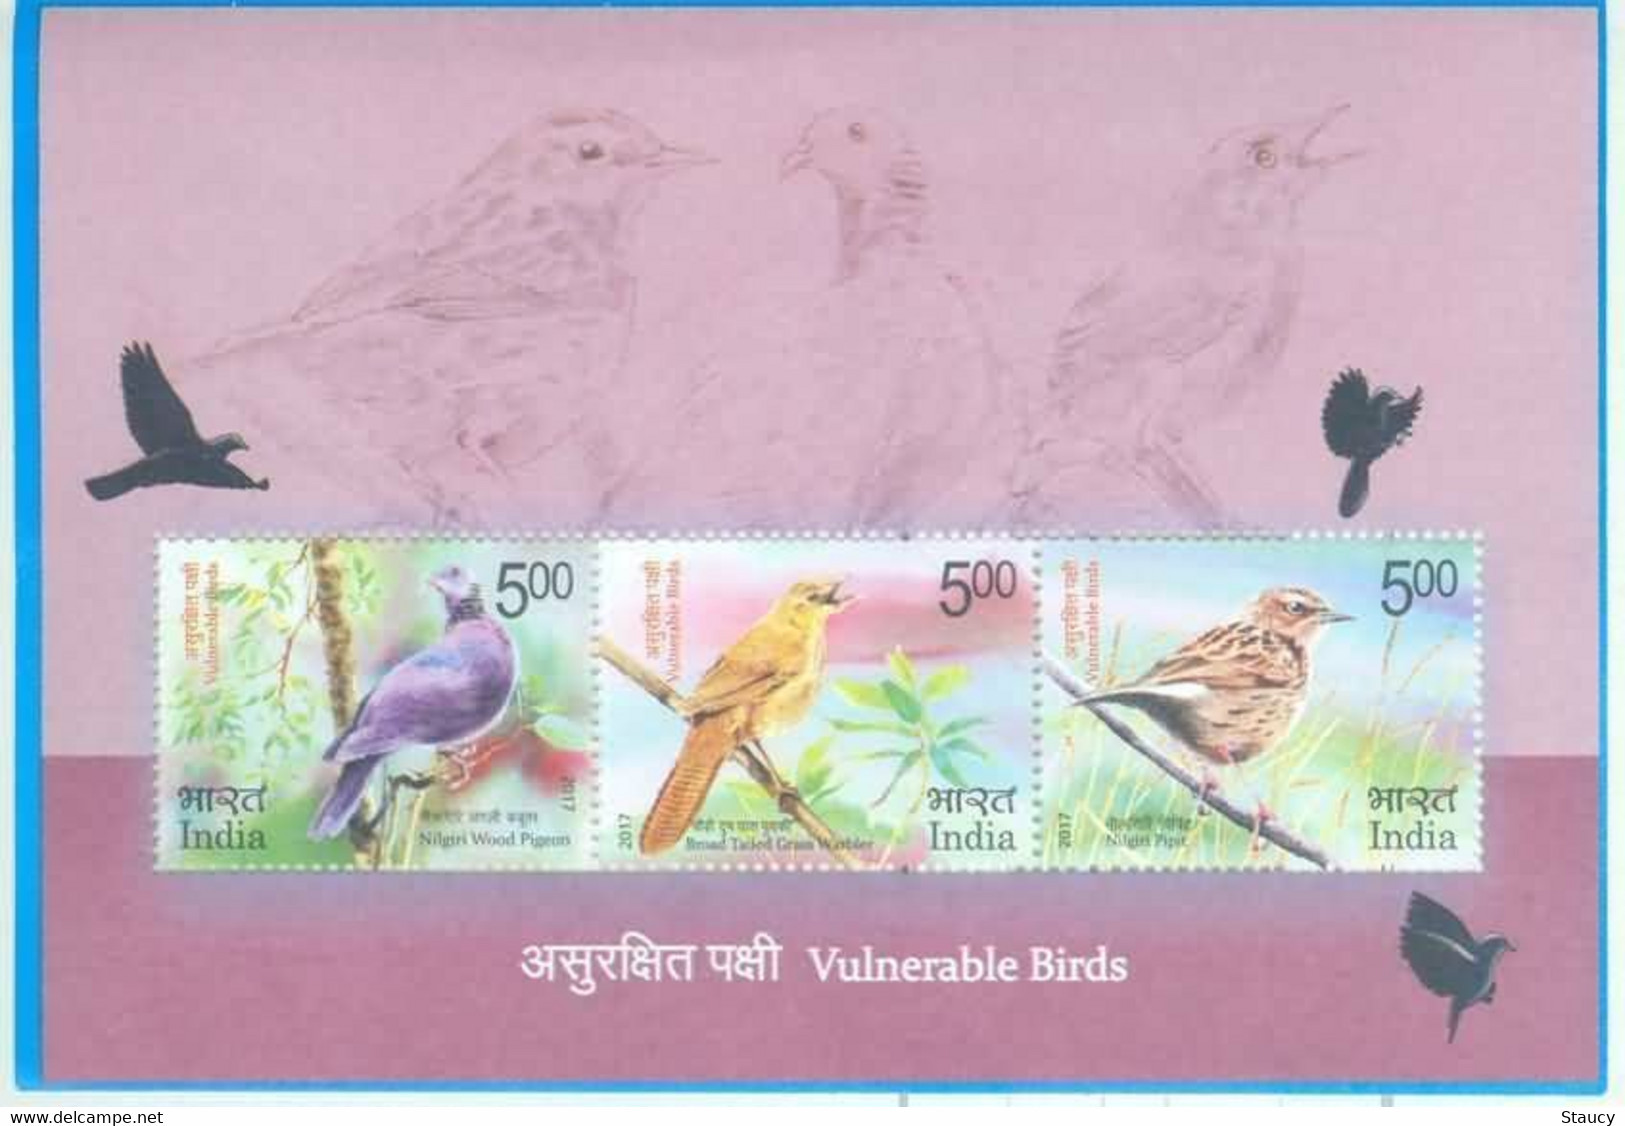 India 2017 Vulnerable Birds Endangered Animal Species Pigeon MINIATURE SHEET MS MNH - Sparrows